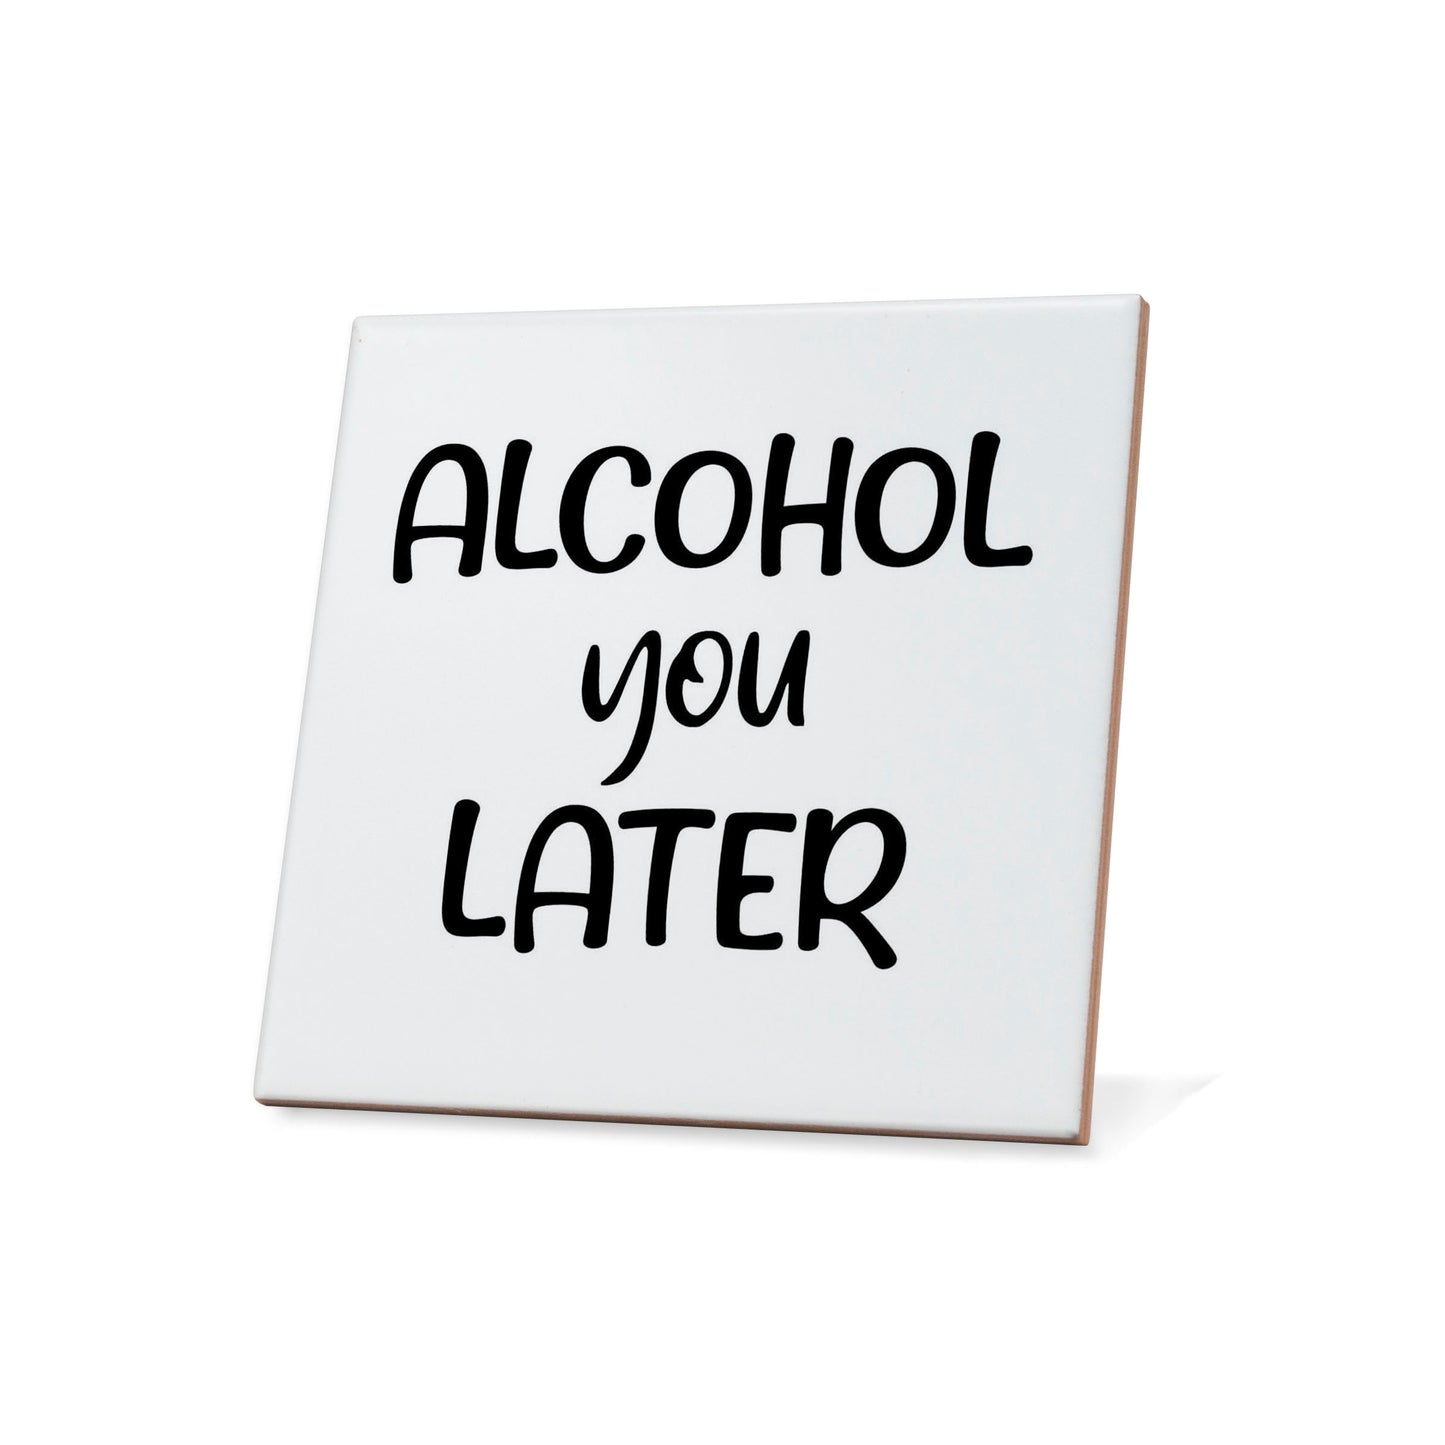 Alcohol you later Quote Coaster